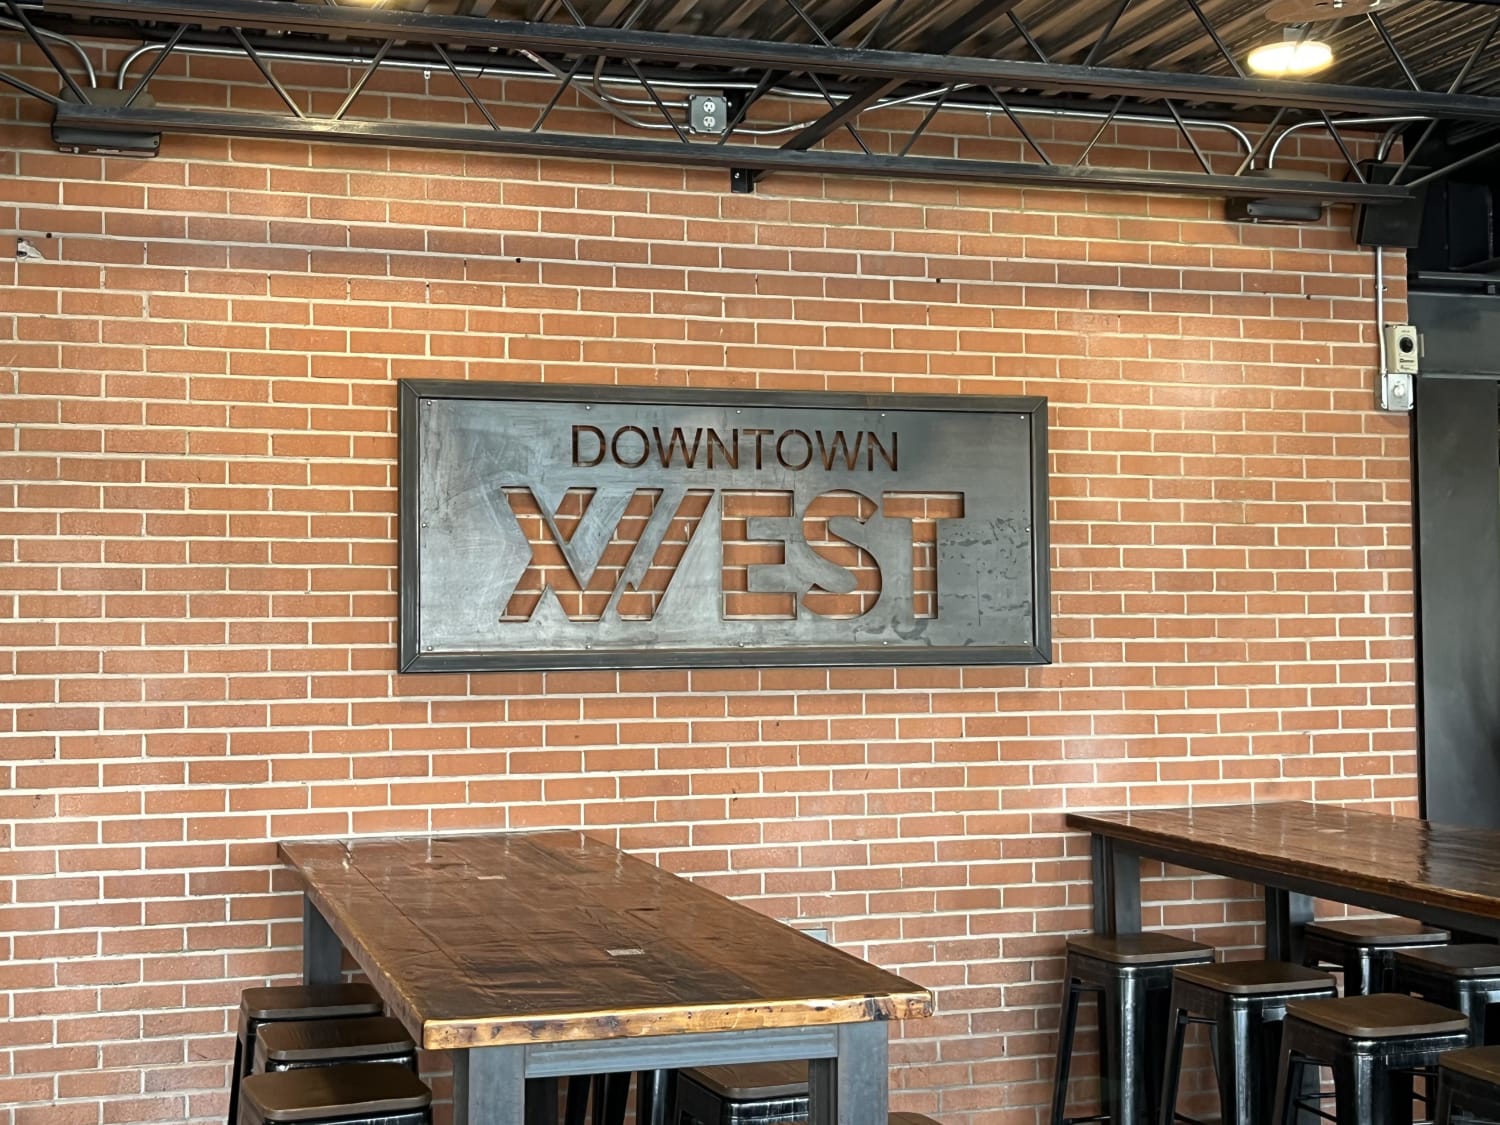 The brewery is named 12 west and used the Roman numeral in the name